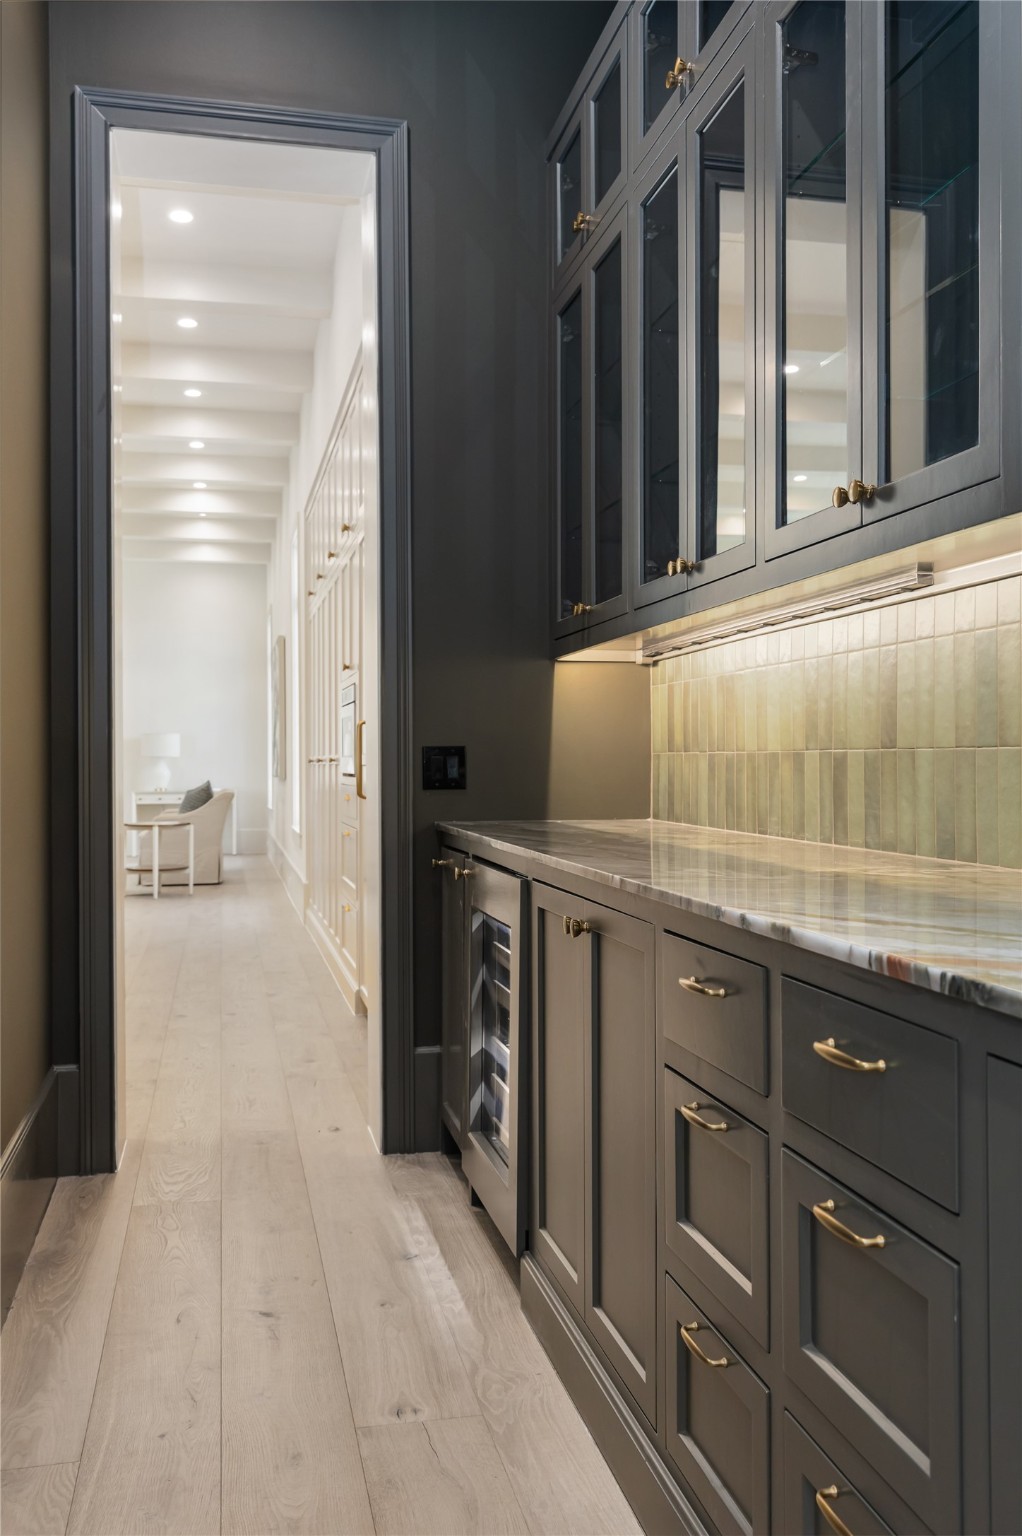 Butler's pantry/bar offers an abundance of storage, including glass display cabinets, wine cooler, and marble countertop. The space is situated in between the formal dining room and the kitchen for easy entertaining.